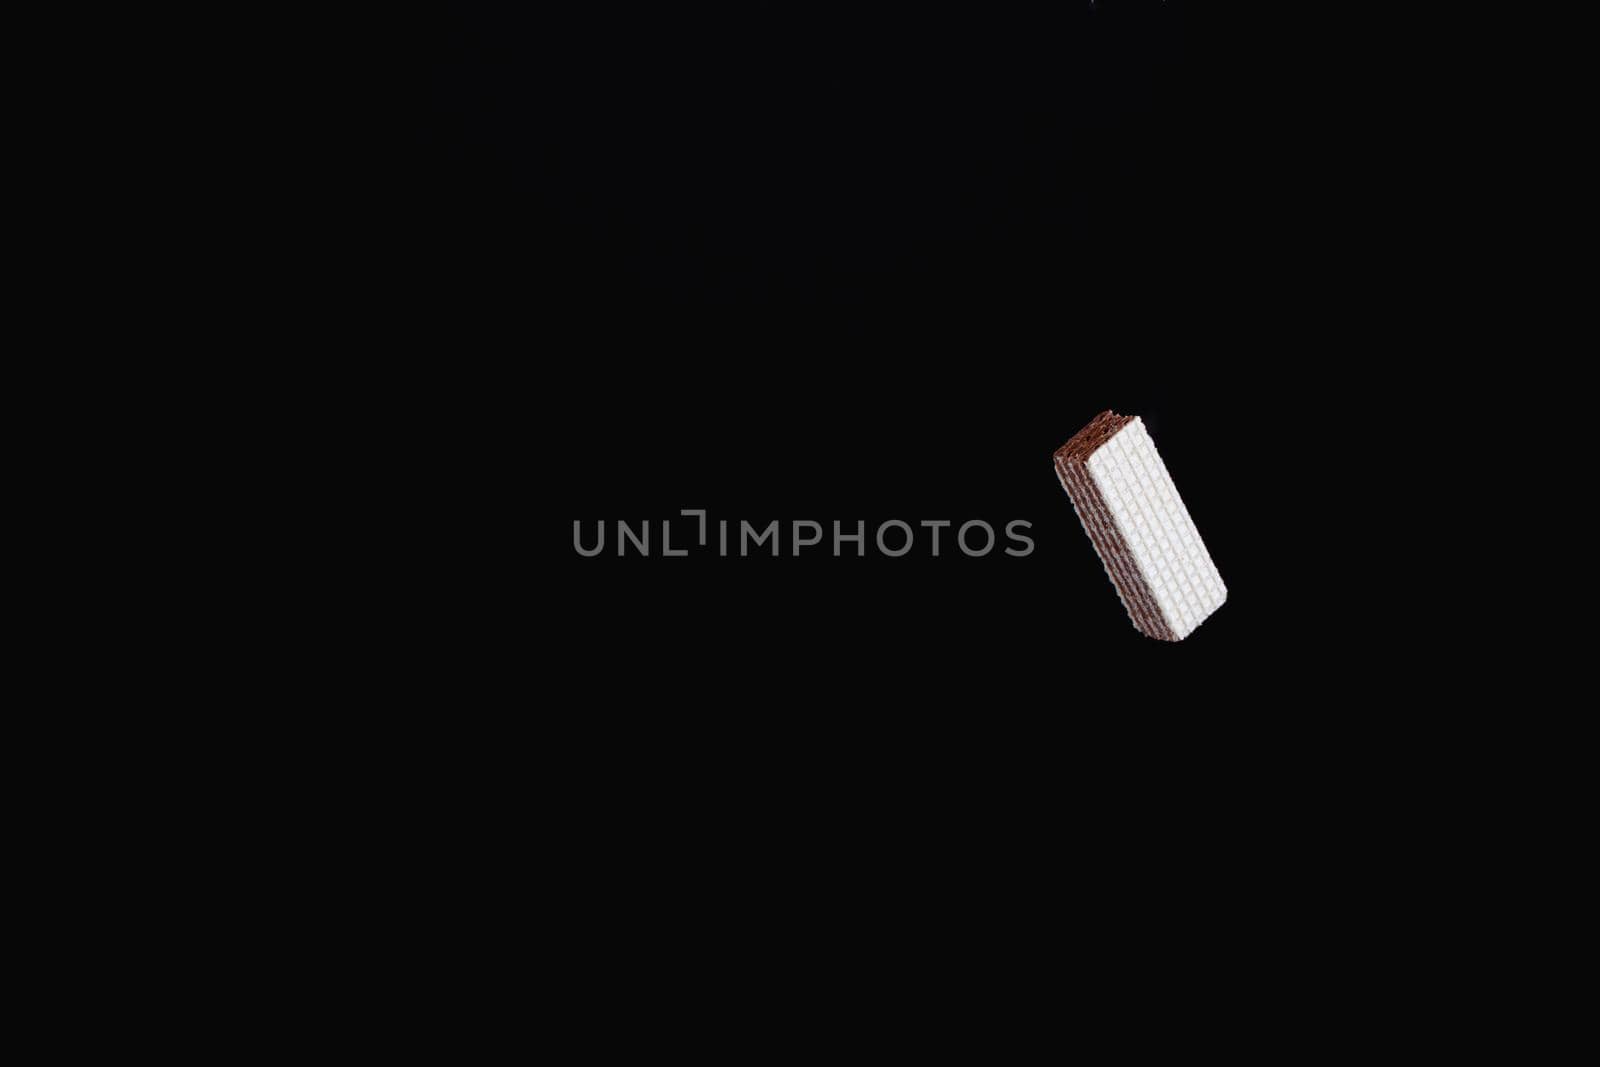 One levitating chocolate wafer on a black background